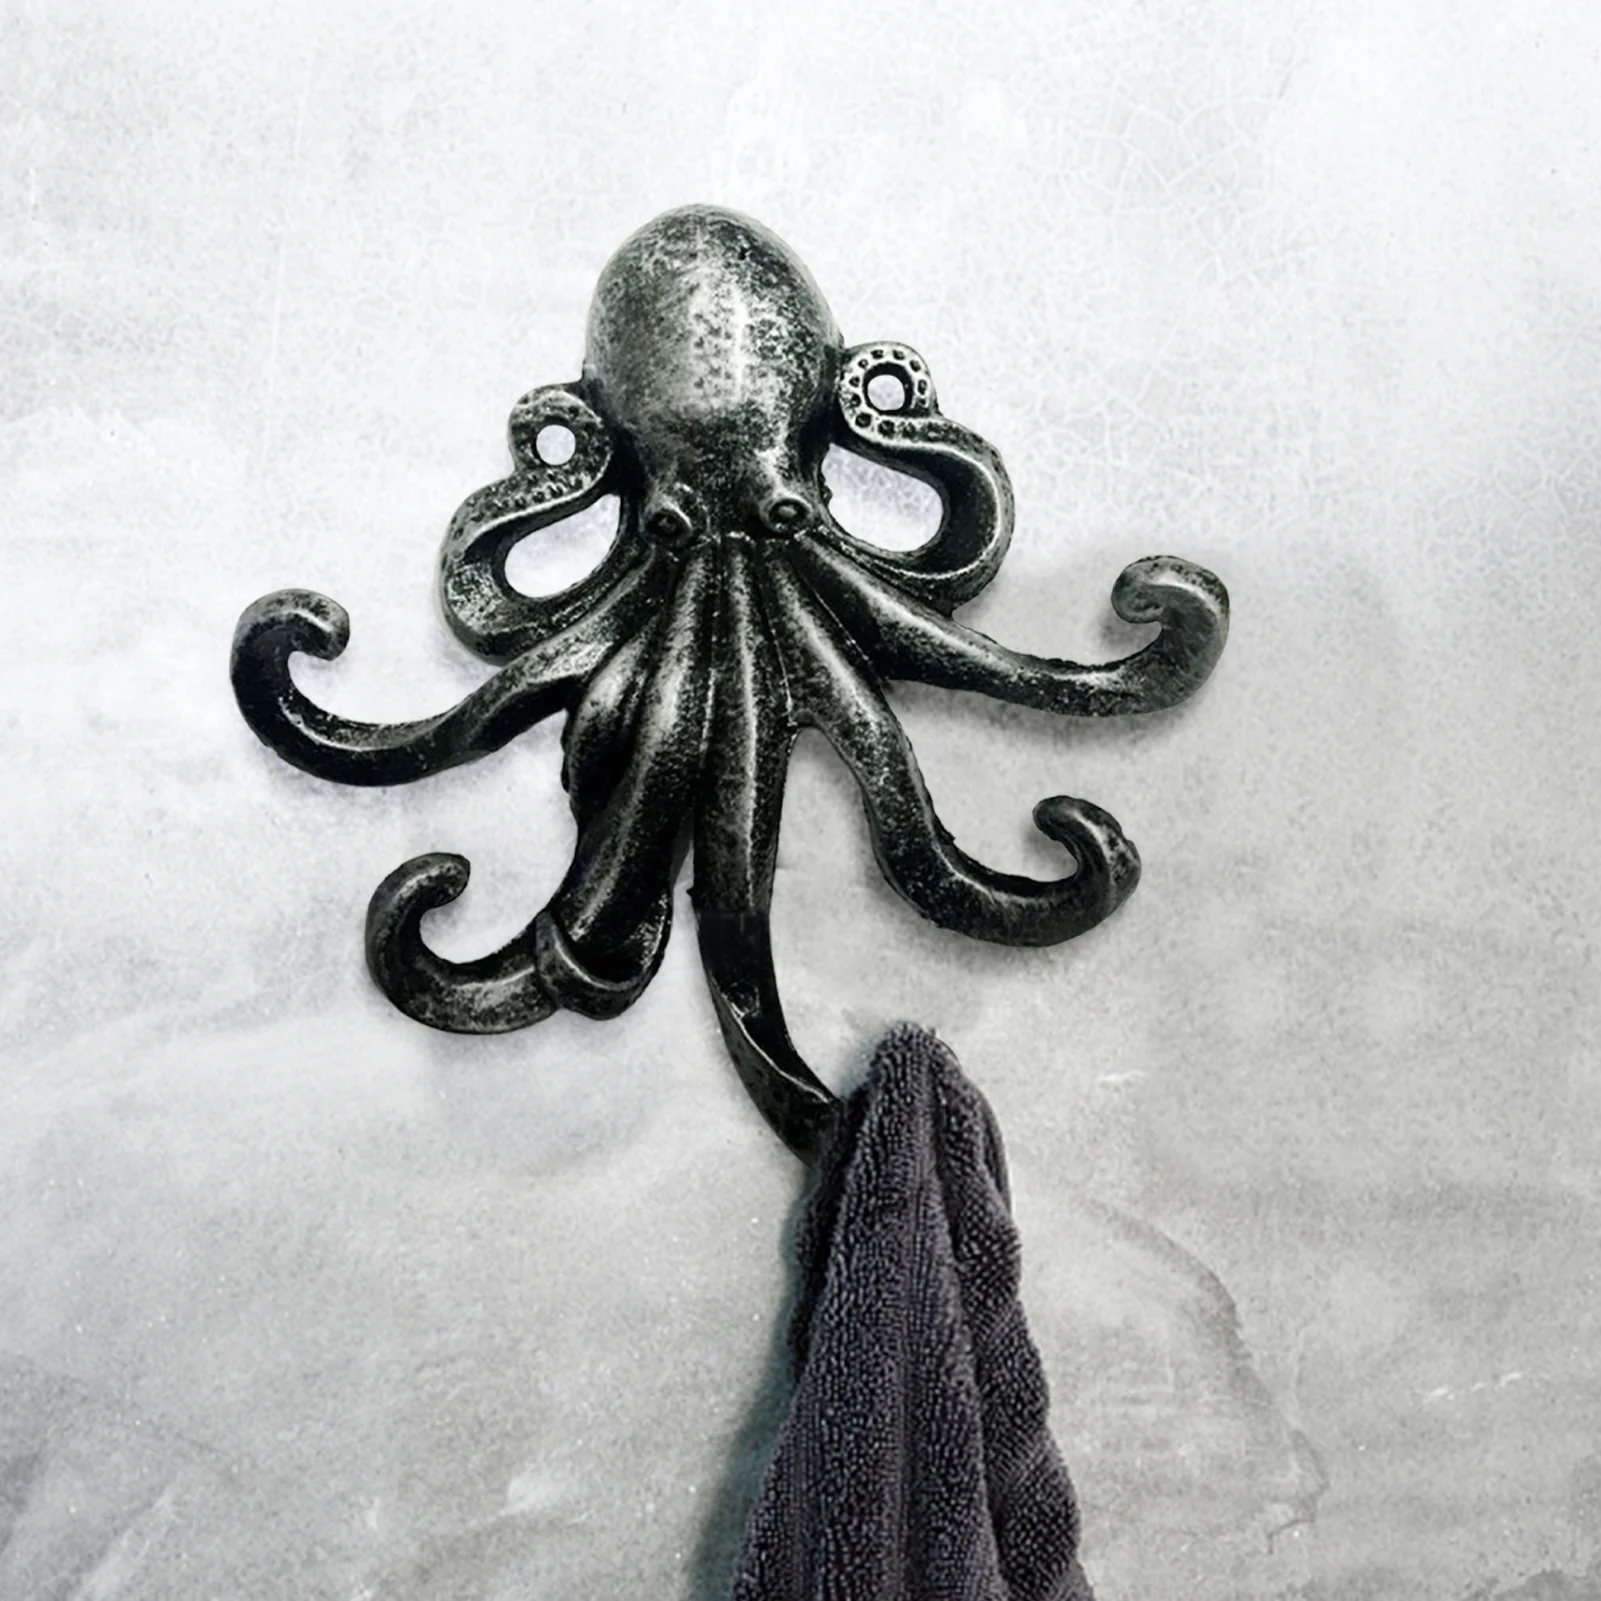 Cast Iron Large Octopus 5 Hooks Crafts Wrought Key Nordic Vintage Antique  Wall Mounted Clothes Hanger Key Holder Rack